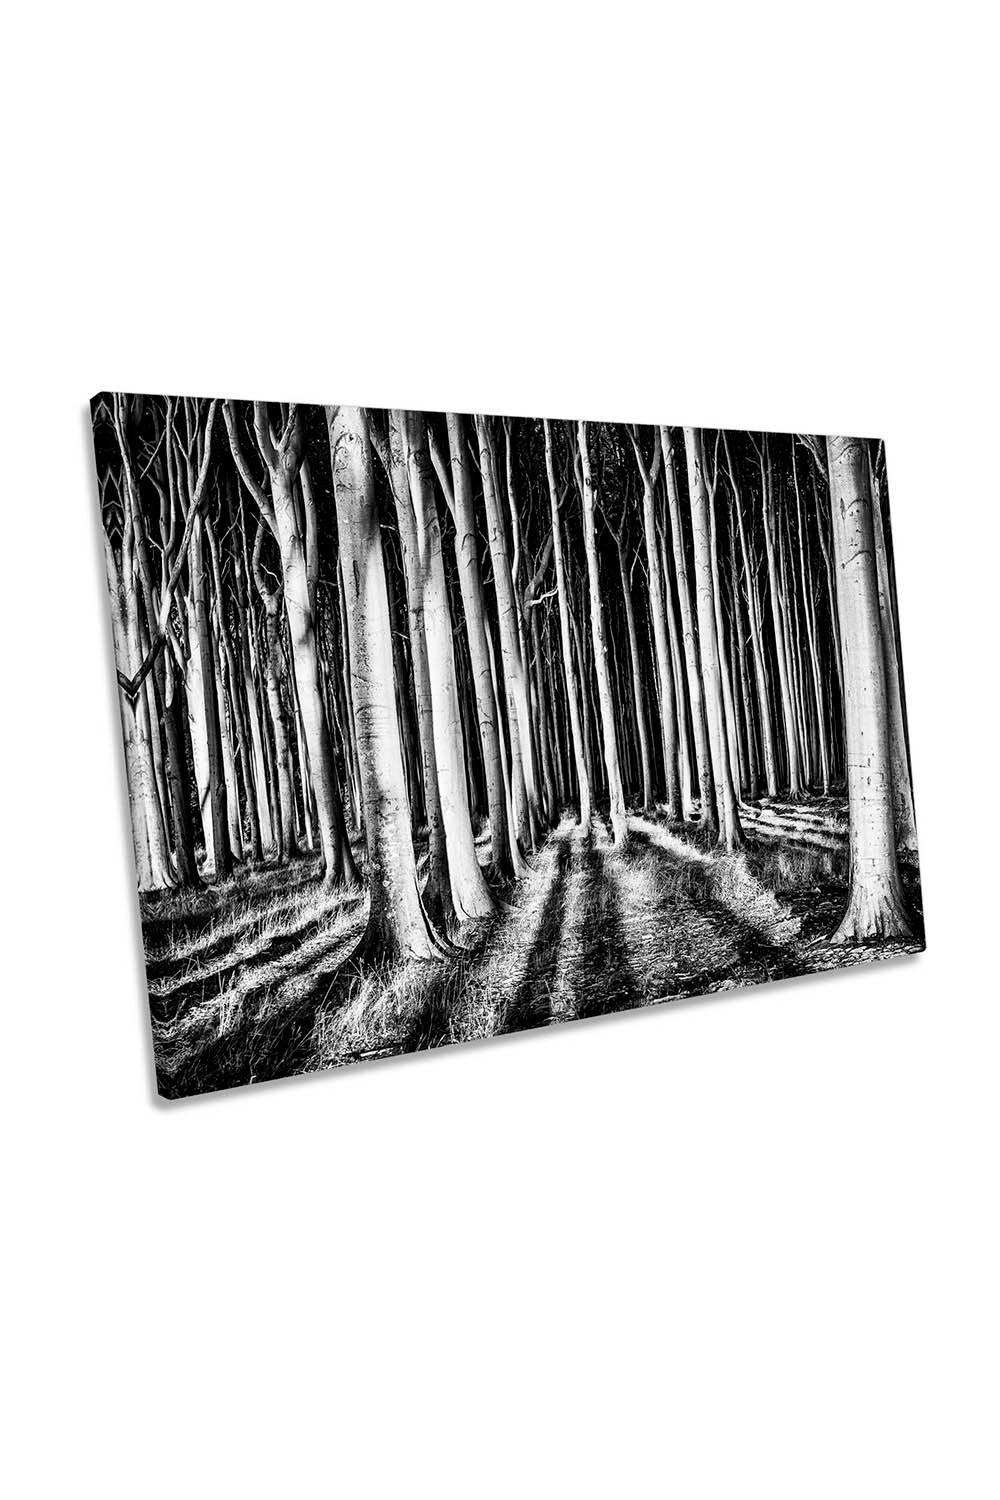 Ghost Forest Tree Shadows Canvas Wall Art Picture Print